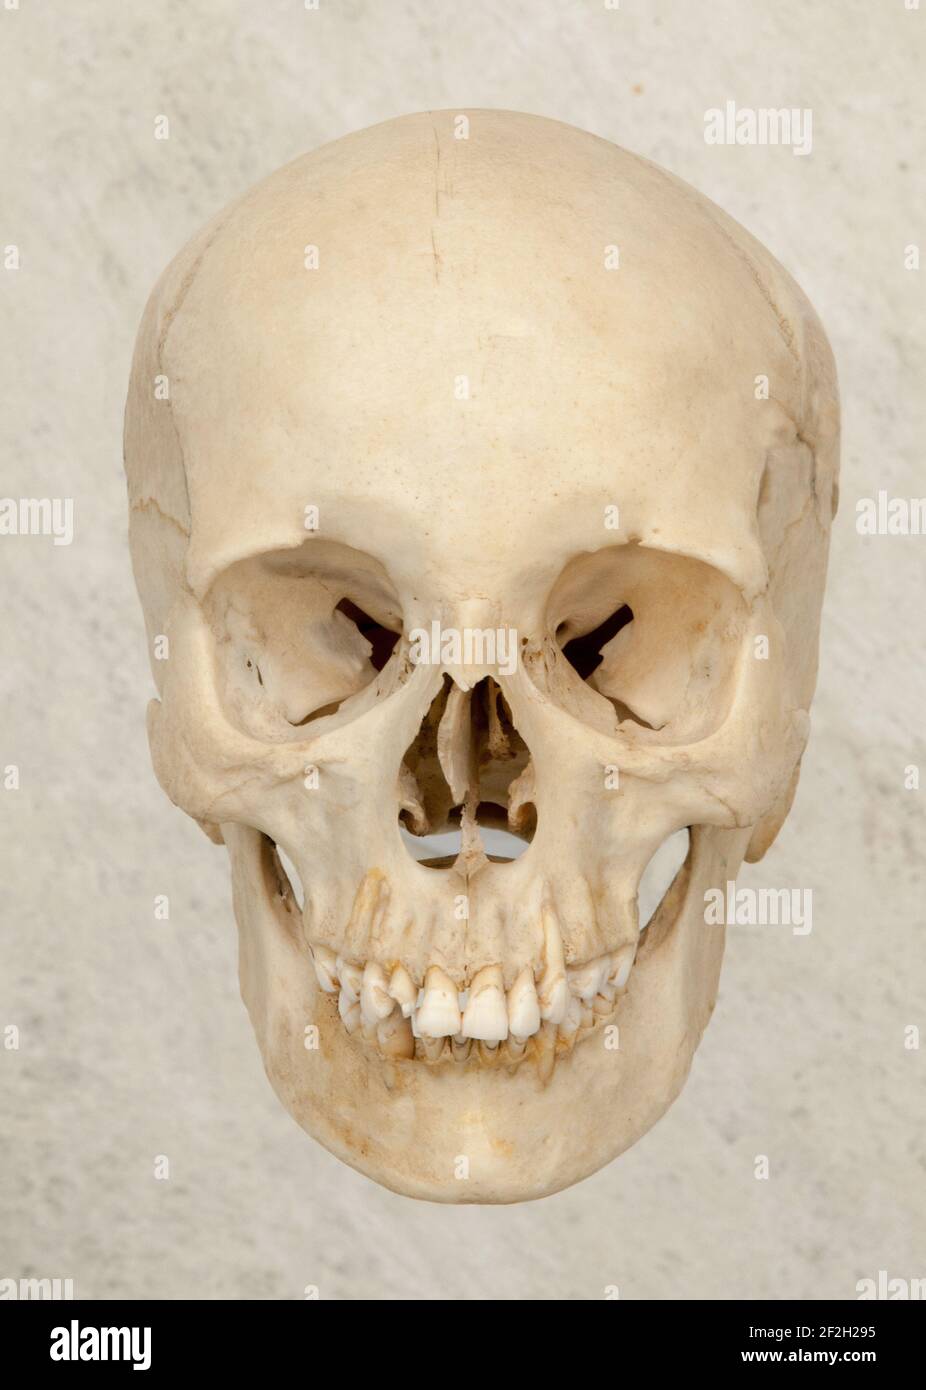 Anterior or front view of human skull on a neutral background. Stock Photo